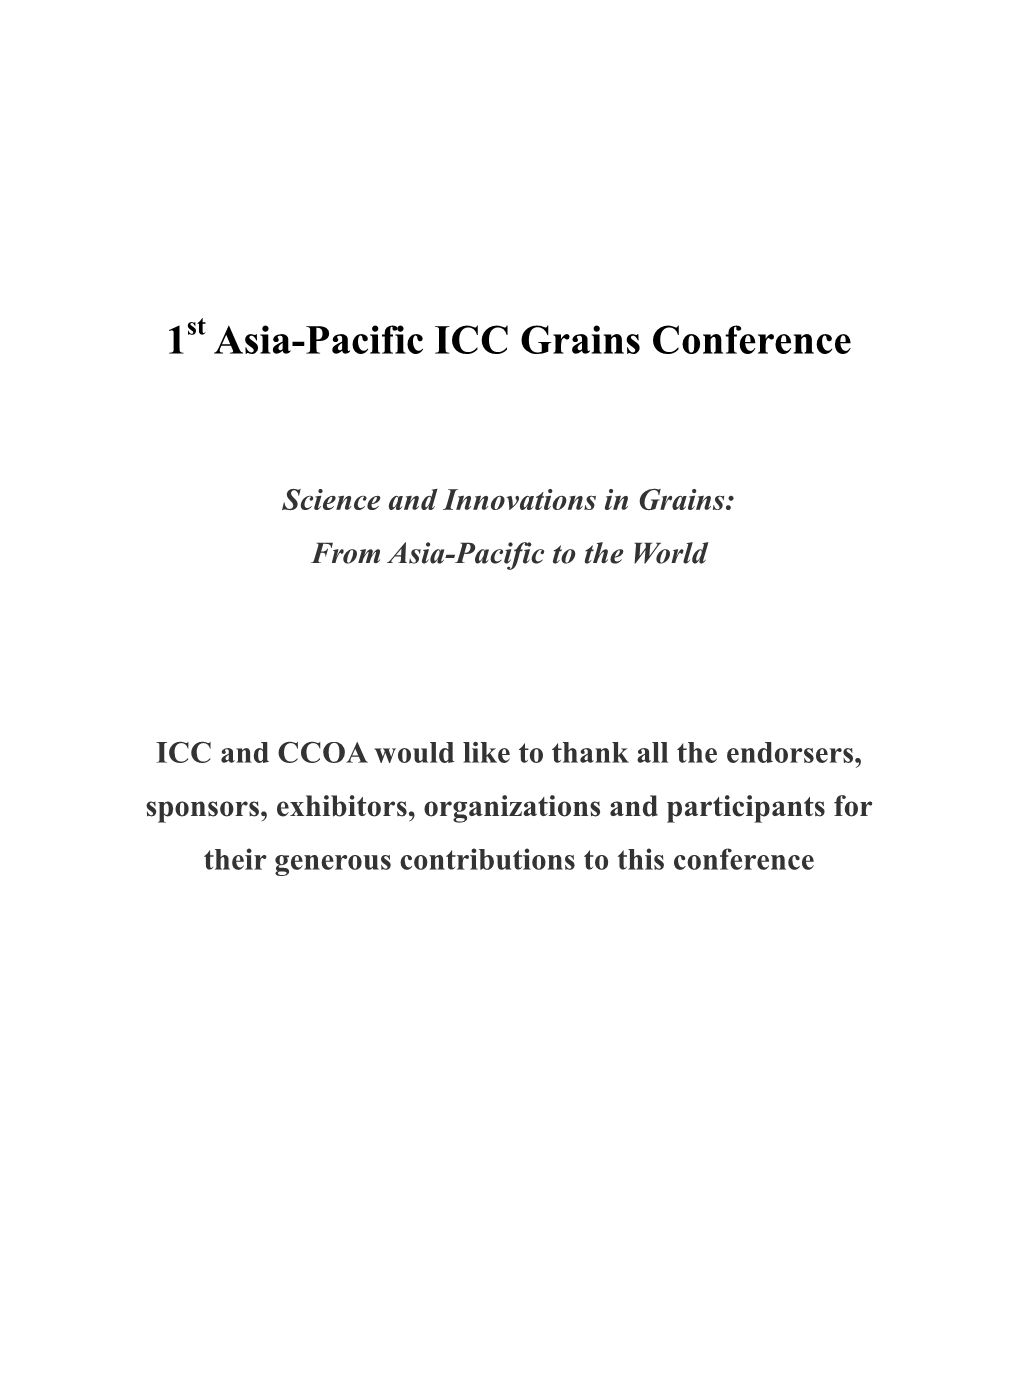 1St Asia-Pacific ICC Grains Conference